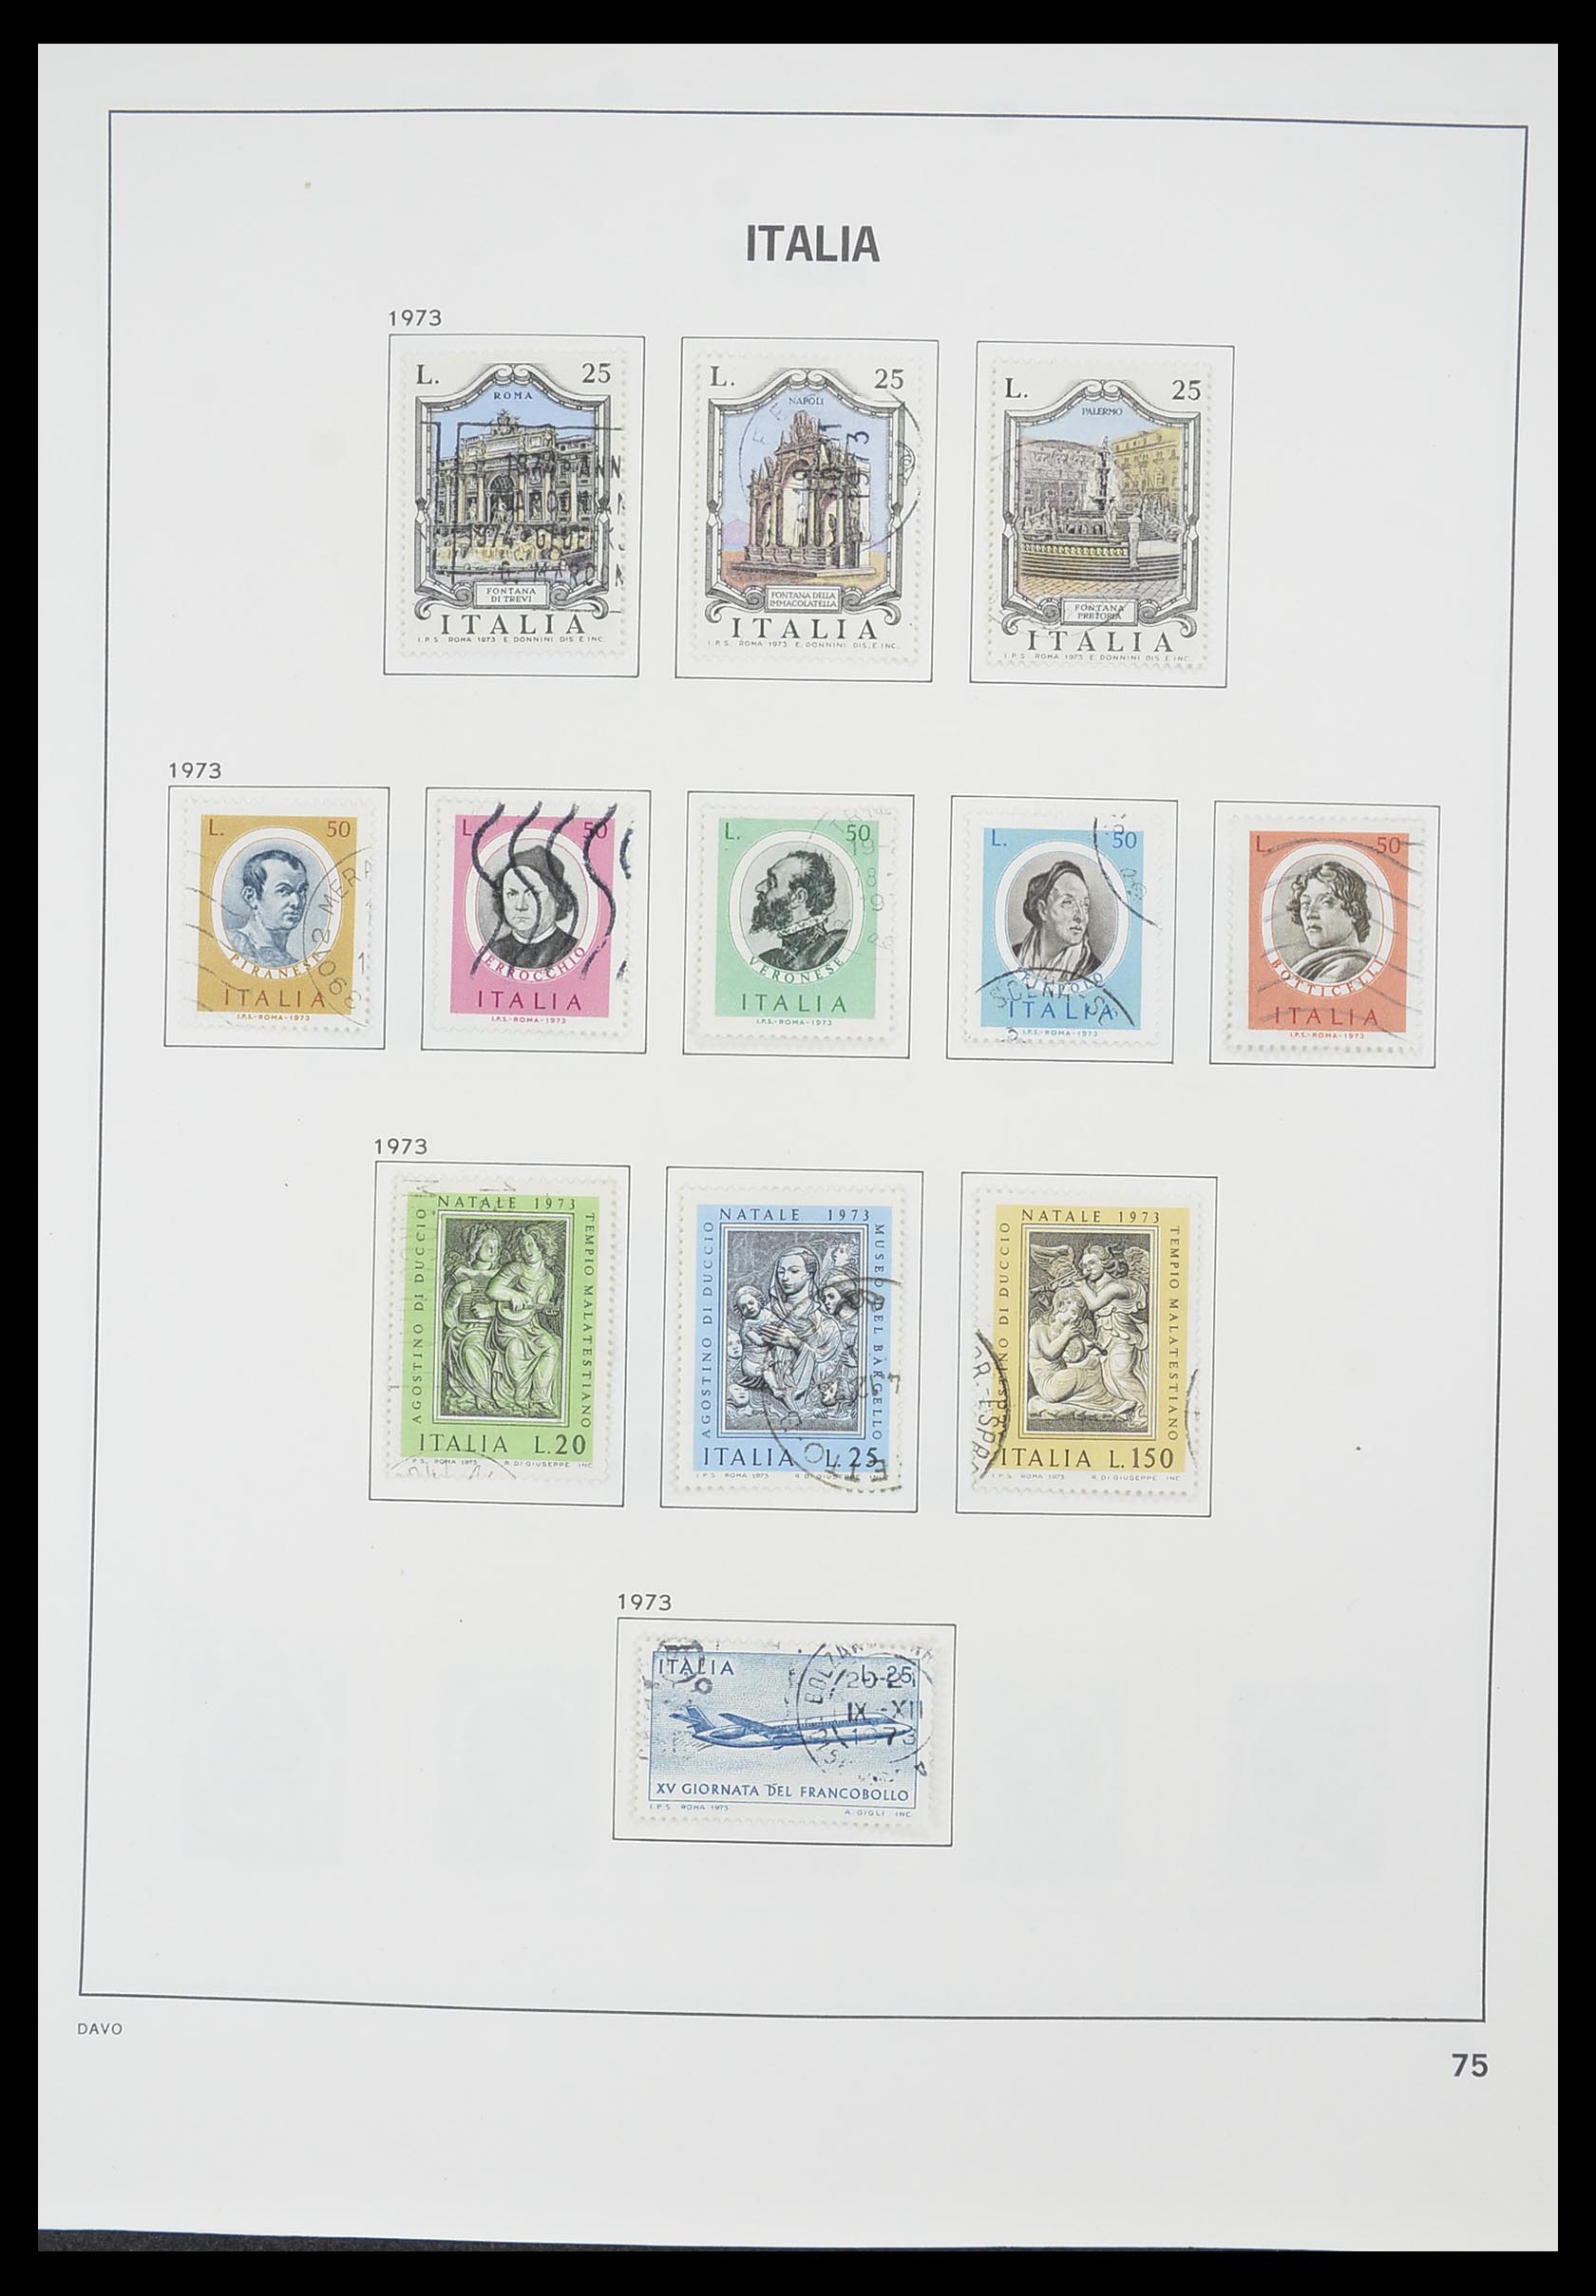 33413 050 - Stamp collection 33413 Italy 1945-2000.